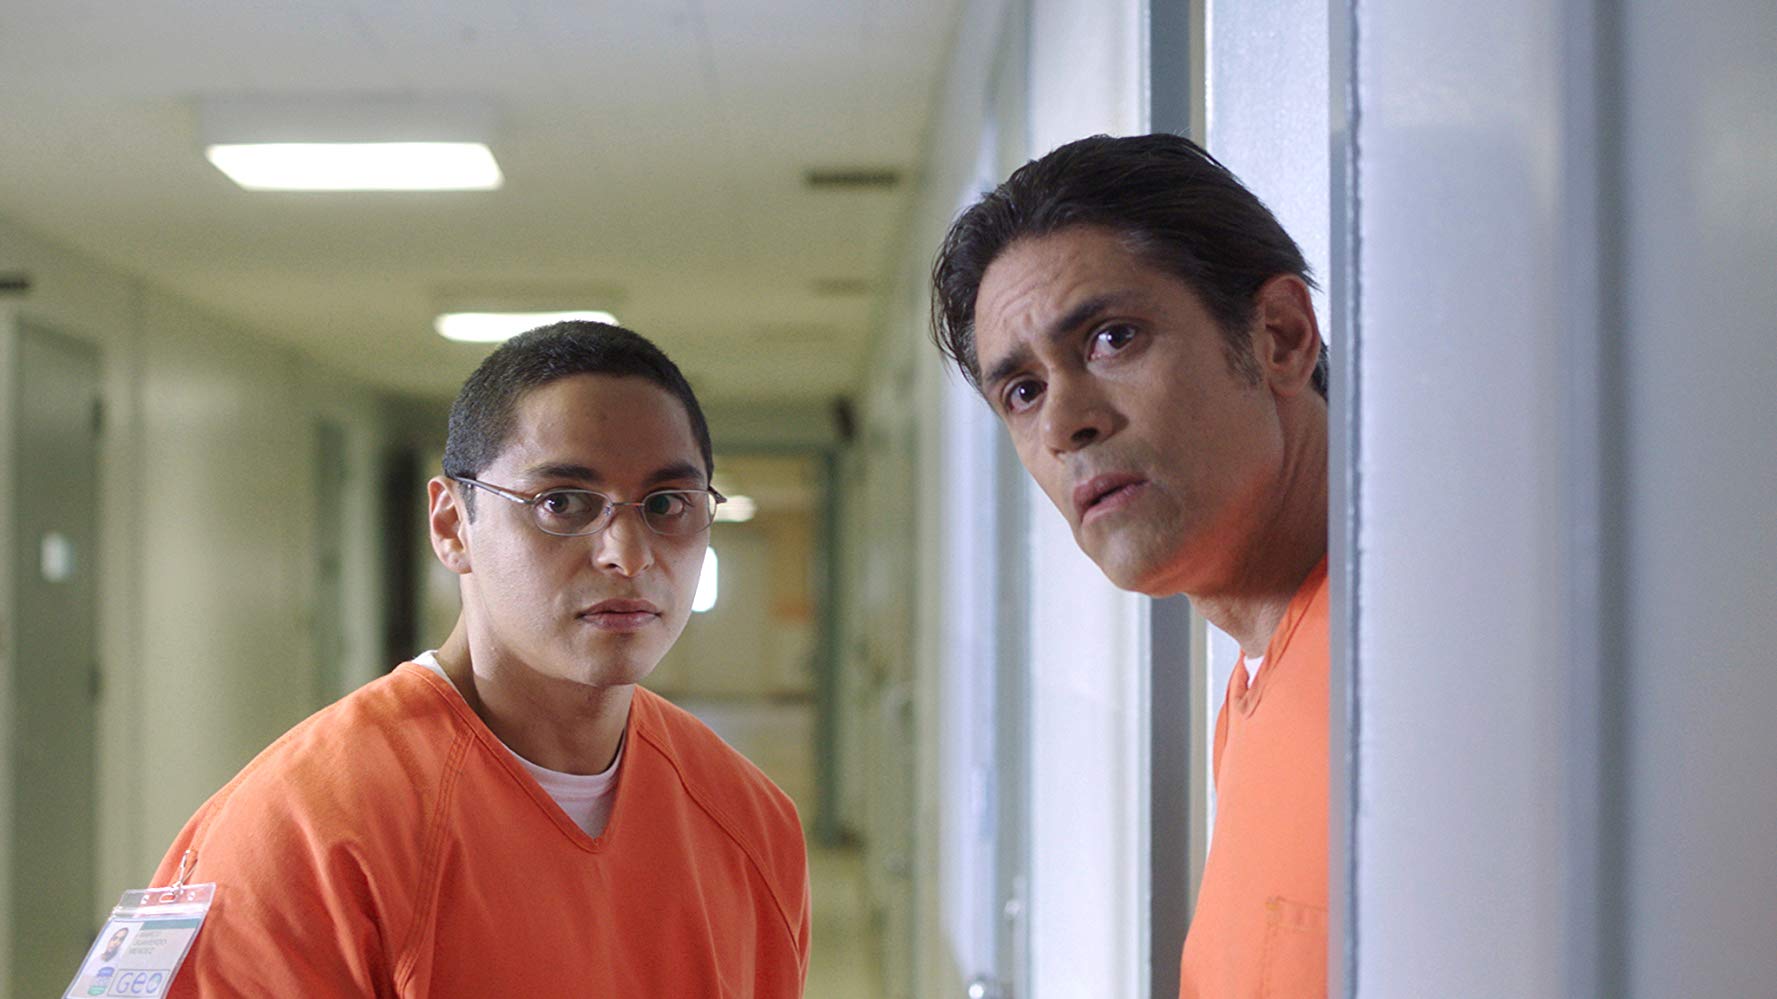 Still from Alex Rivera's film The Infiltrators. Two men in a detention center, wearing orange uniforms, look down a hallway.